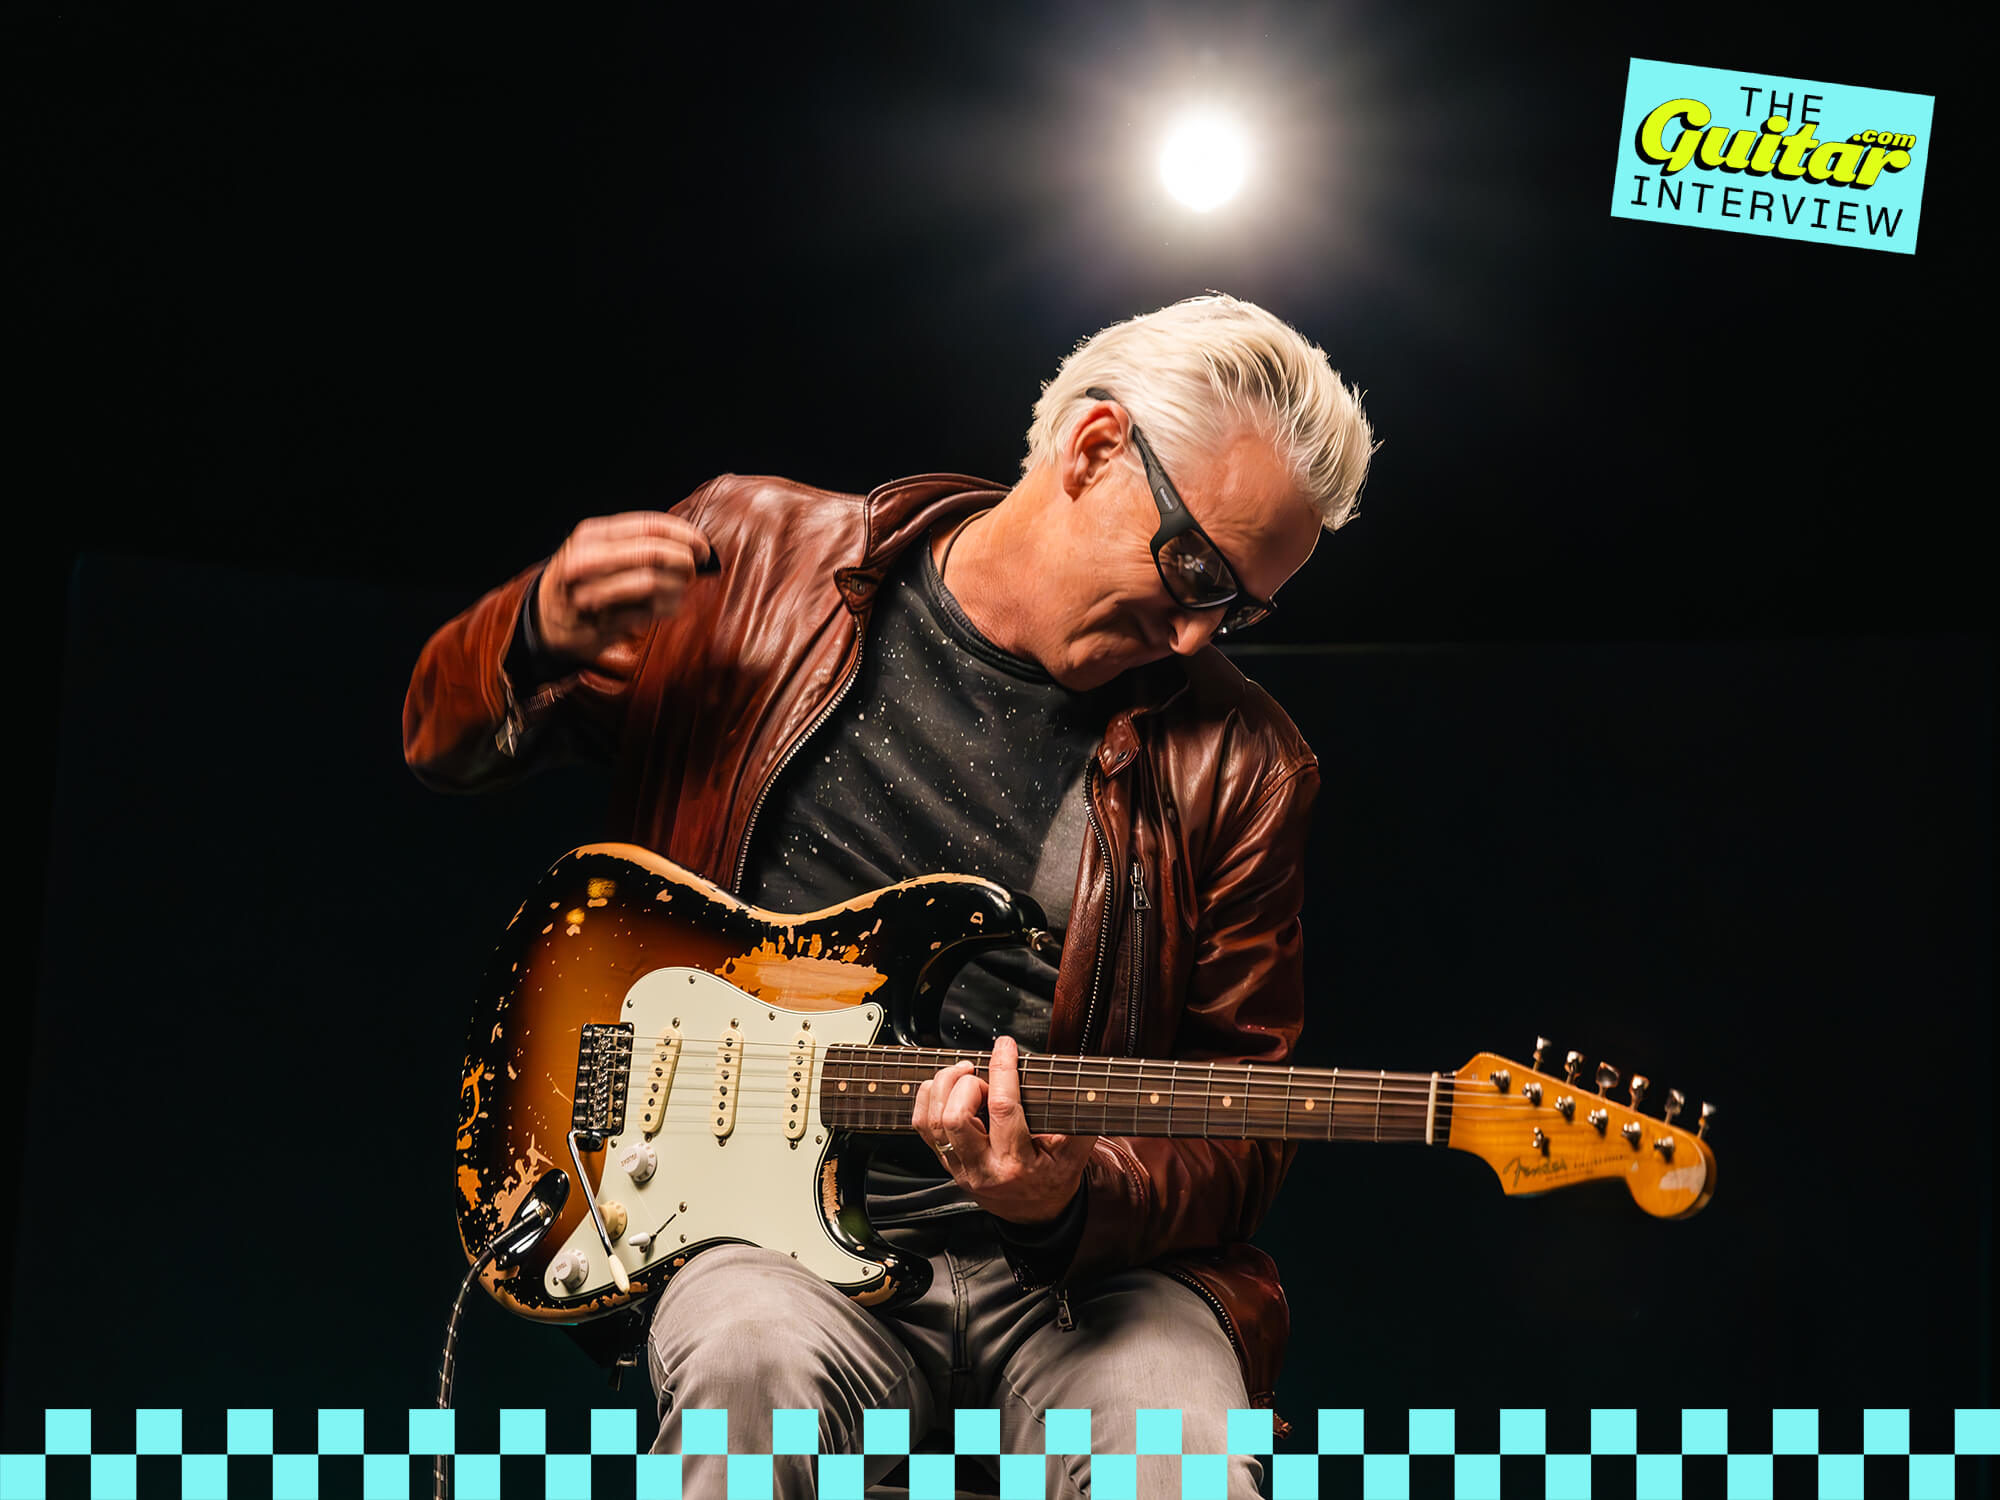 Mike McCready playing his signature Fender Stratocaster